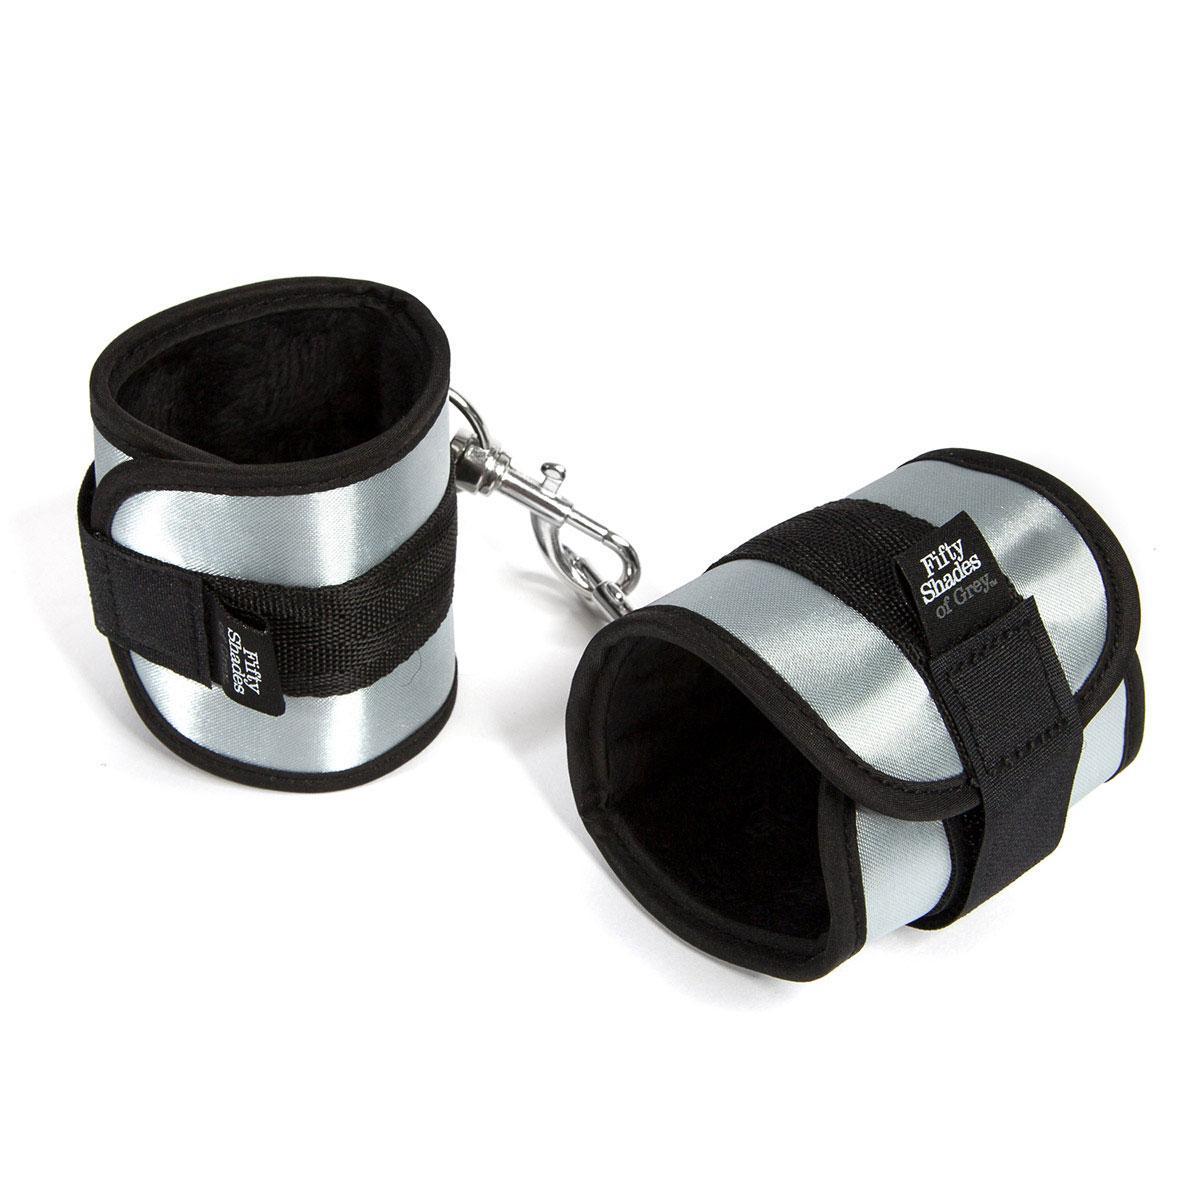 Fifty Shades Totally His Handcuffs - Buy At Luxury Toy X - Free 3-Day Shipping